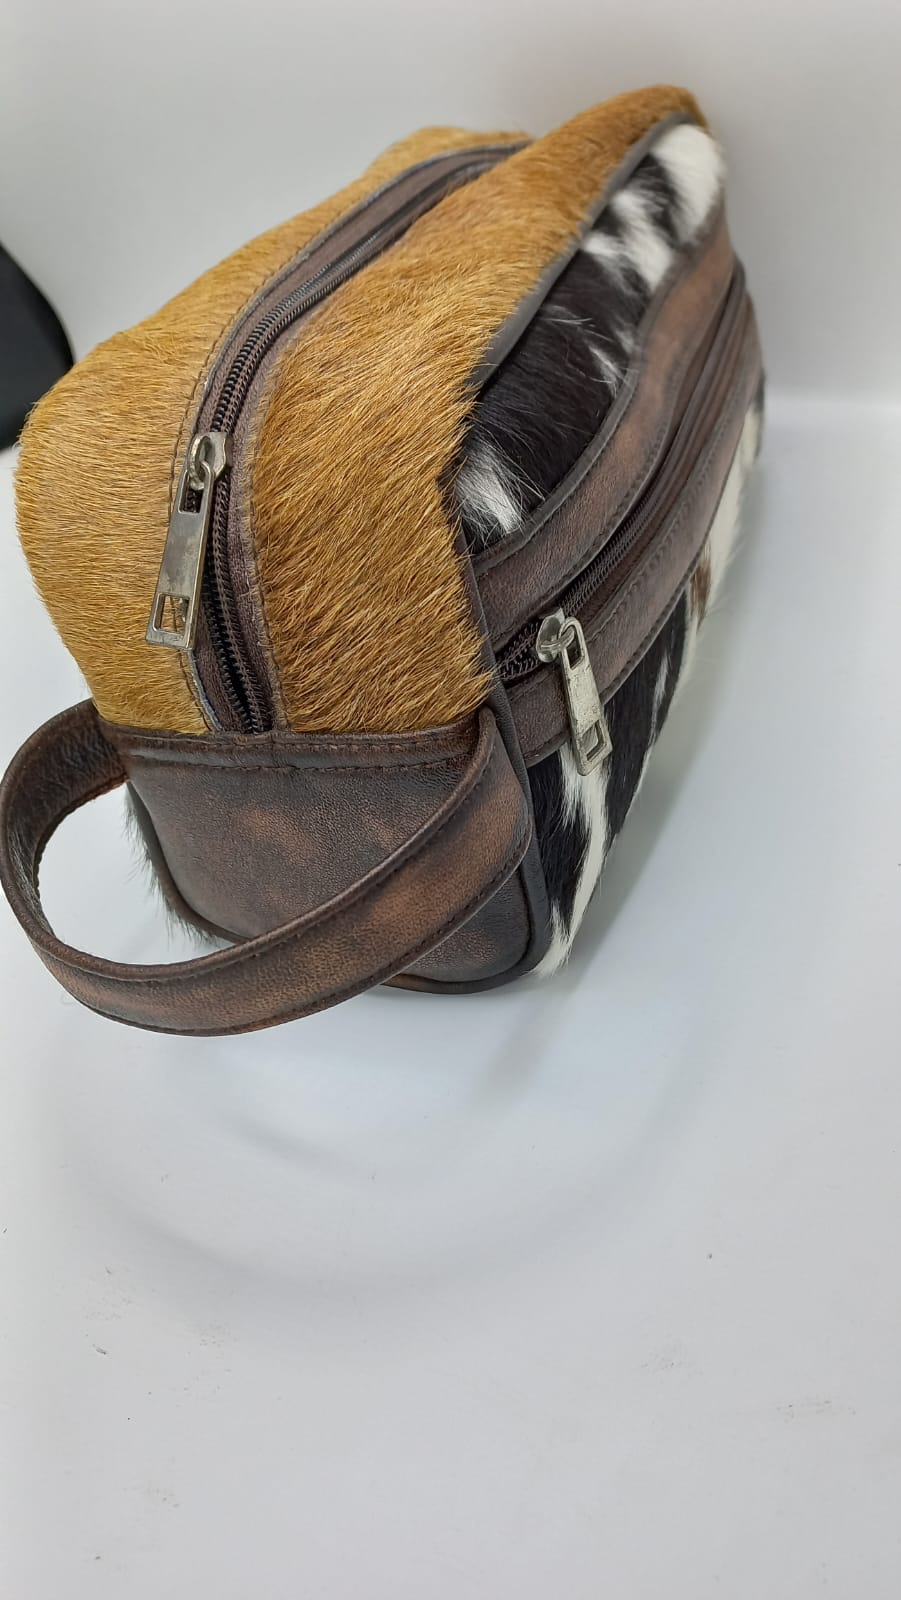 Cowhide Leather Travel Toiletry Bag Zipper Pouch